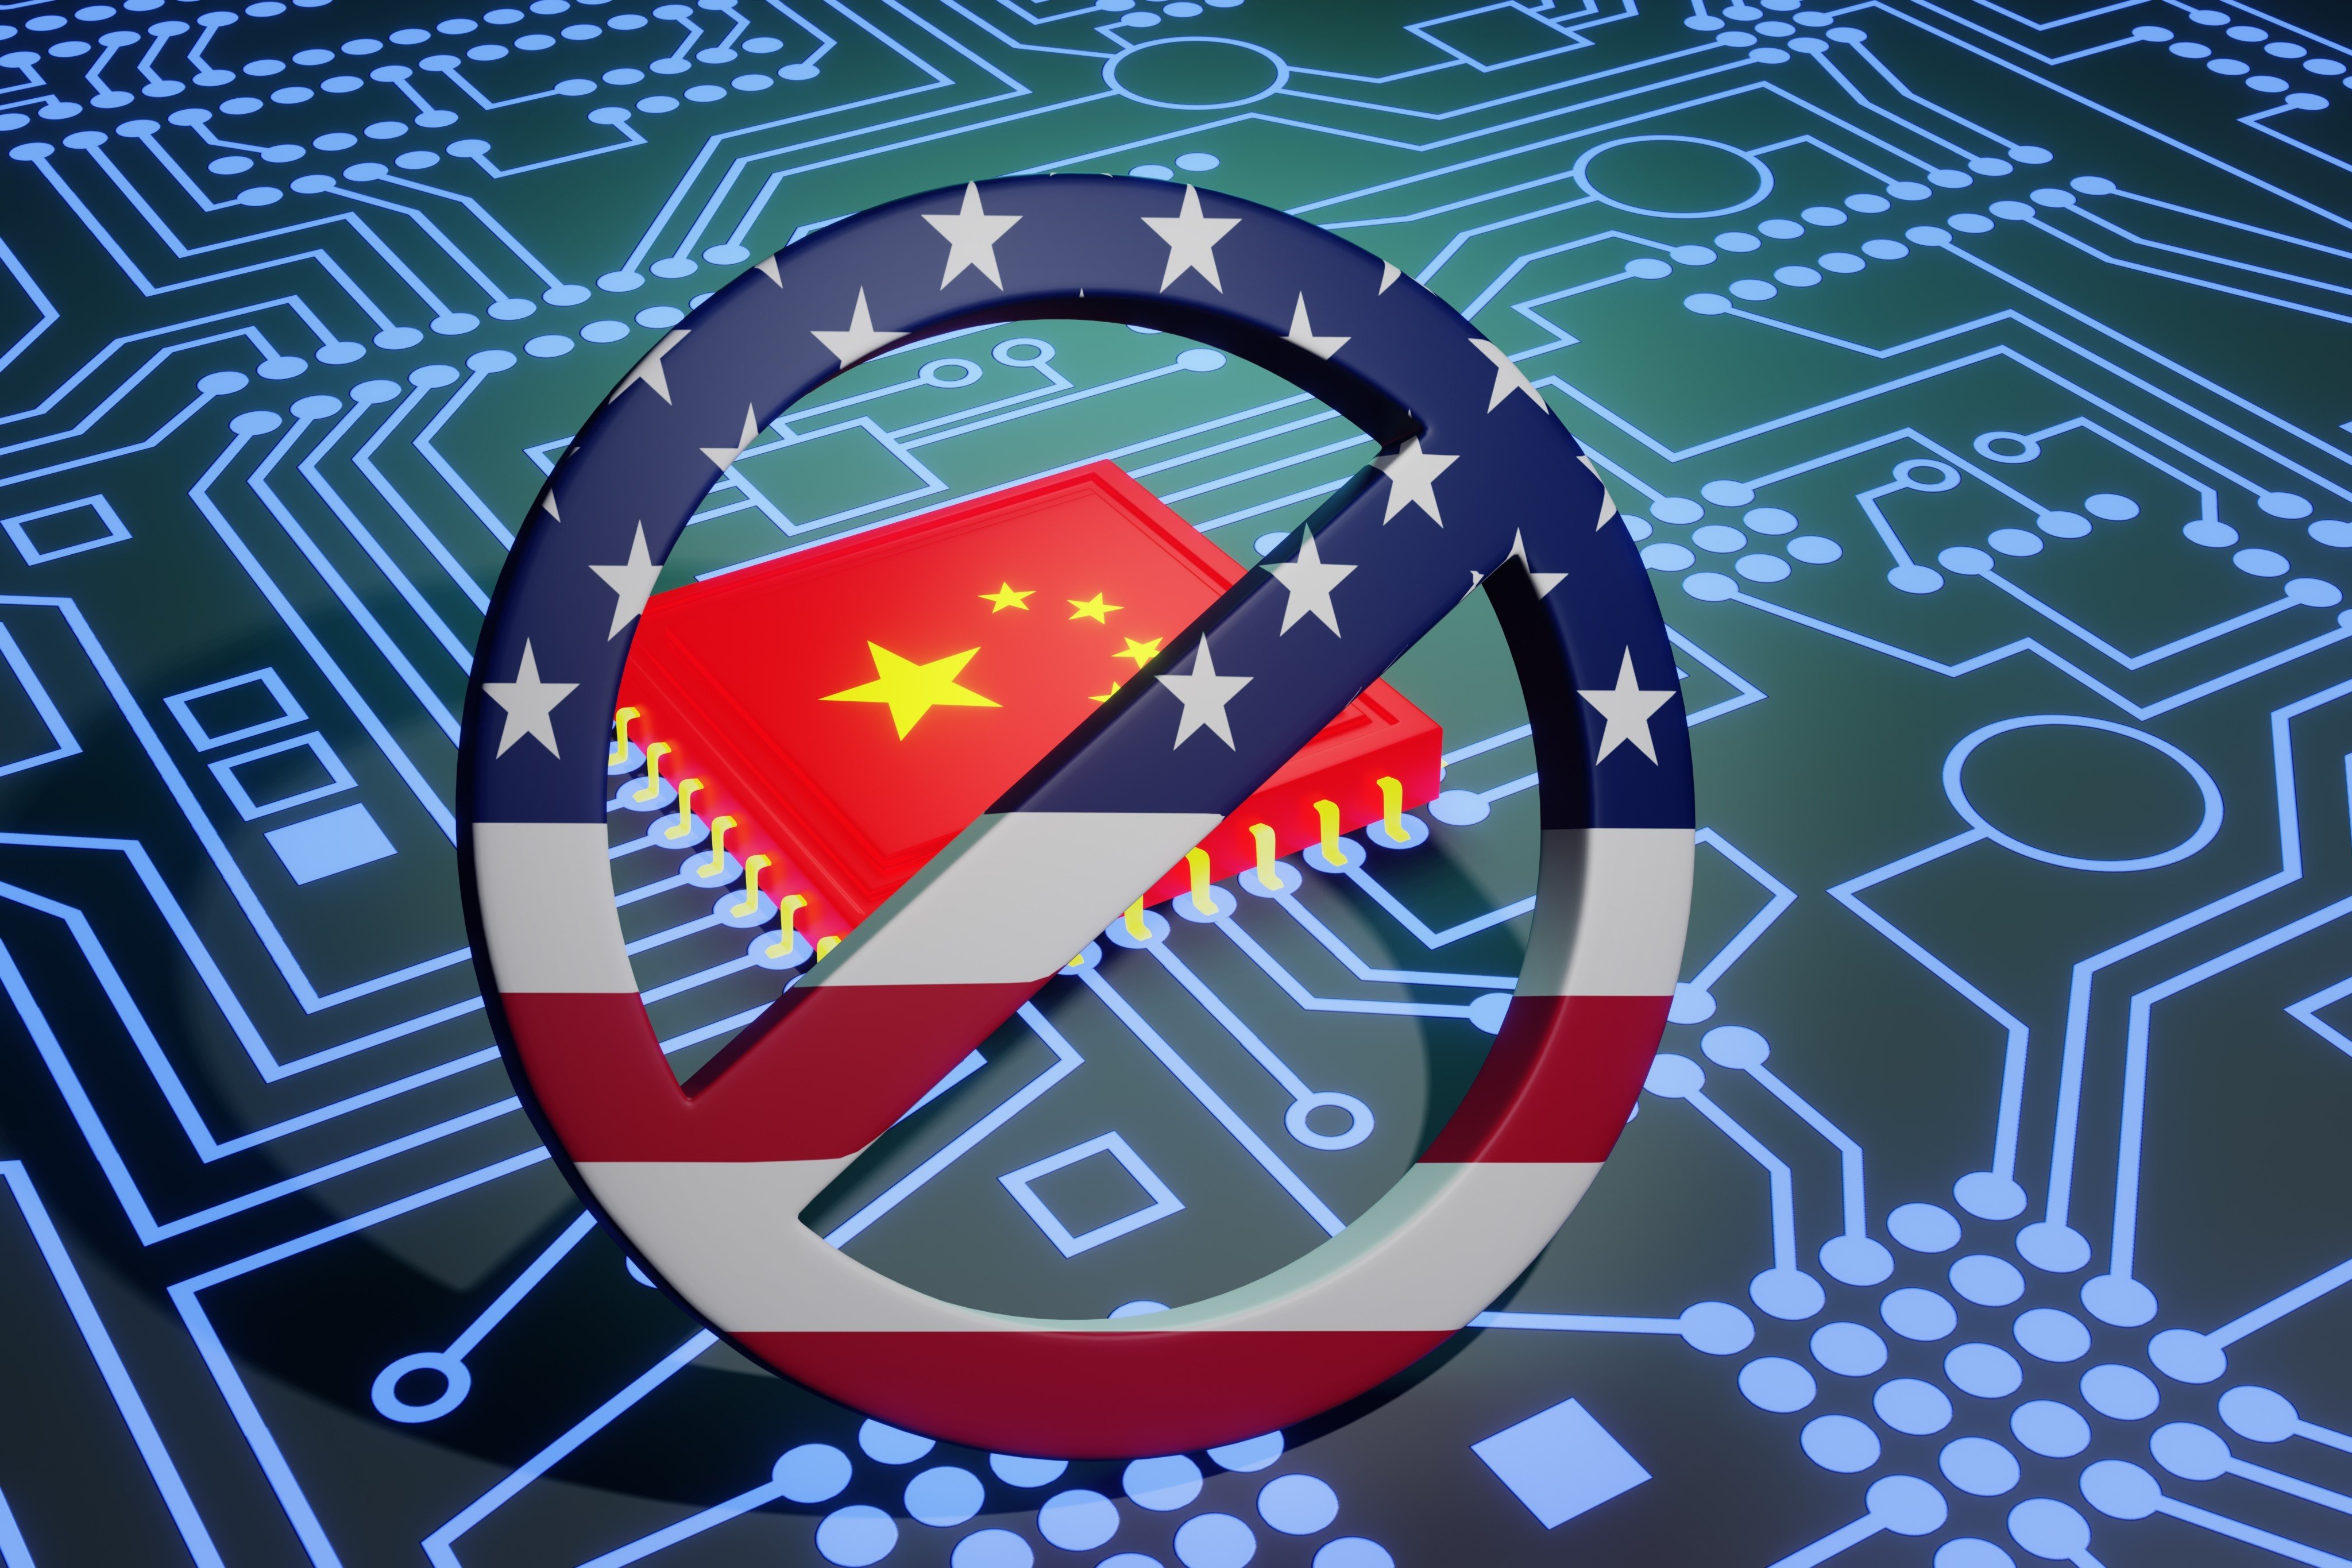 The US has tightened export controls on China’s access to cutting-edge computer chips and manufacturing equipment. Photo: Shutterstock 